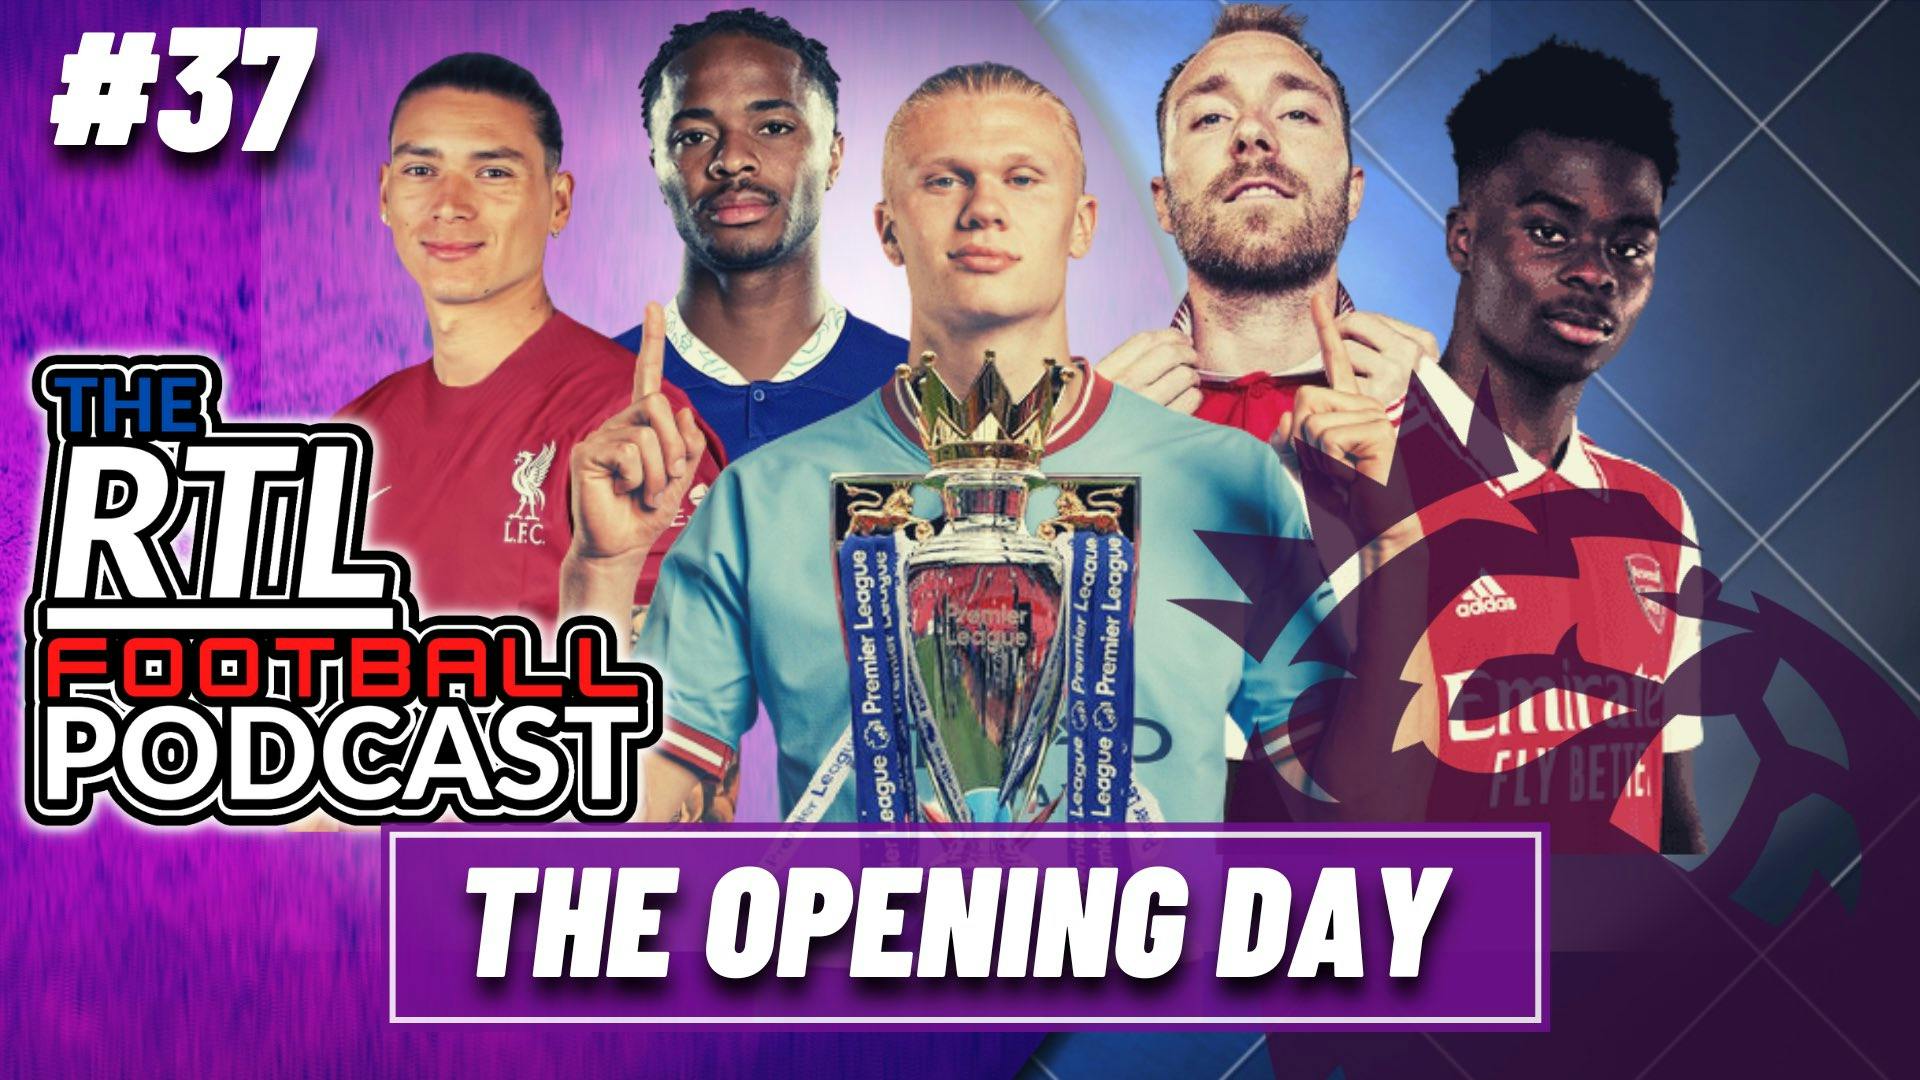 The RTL Football Podcast The Opening Day